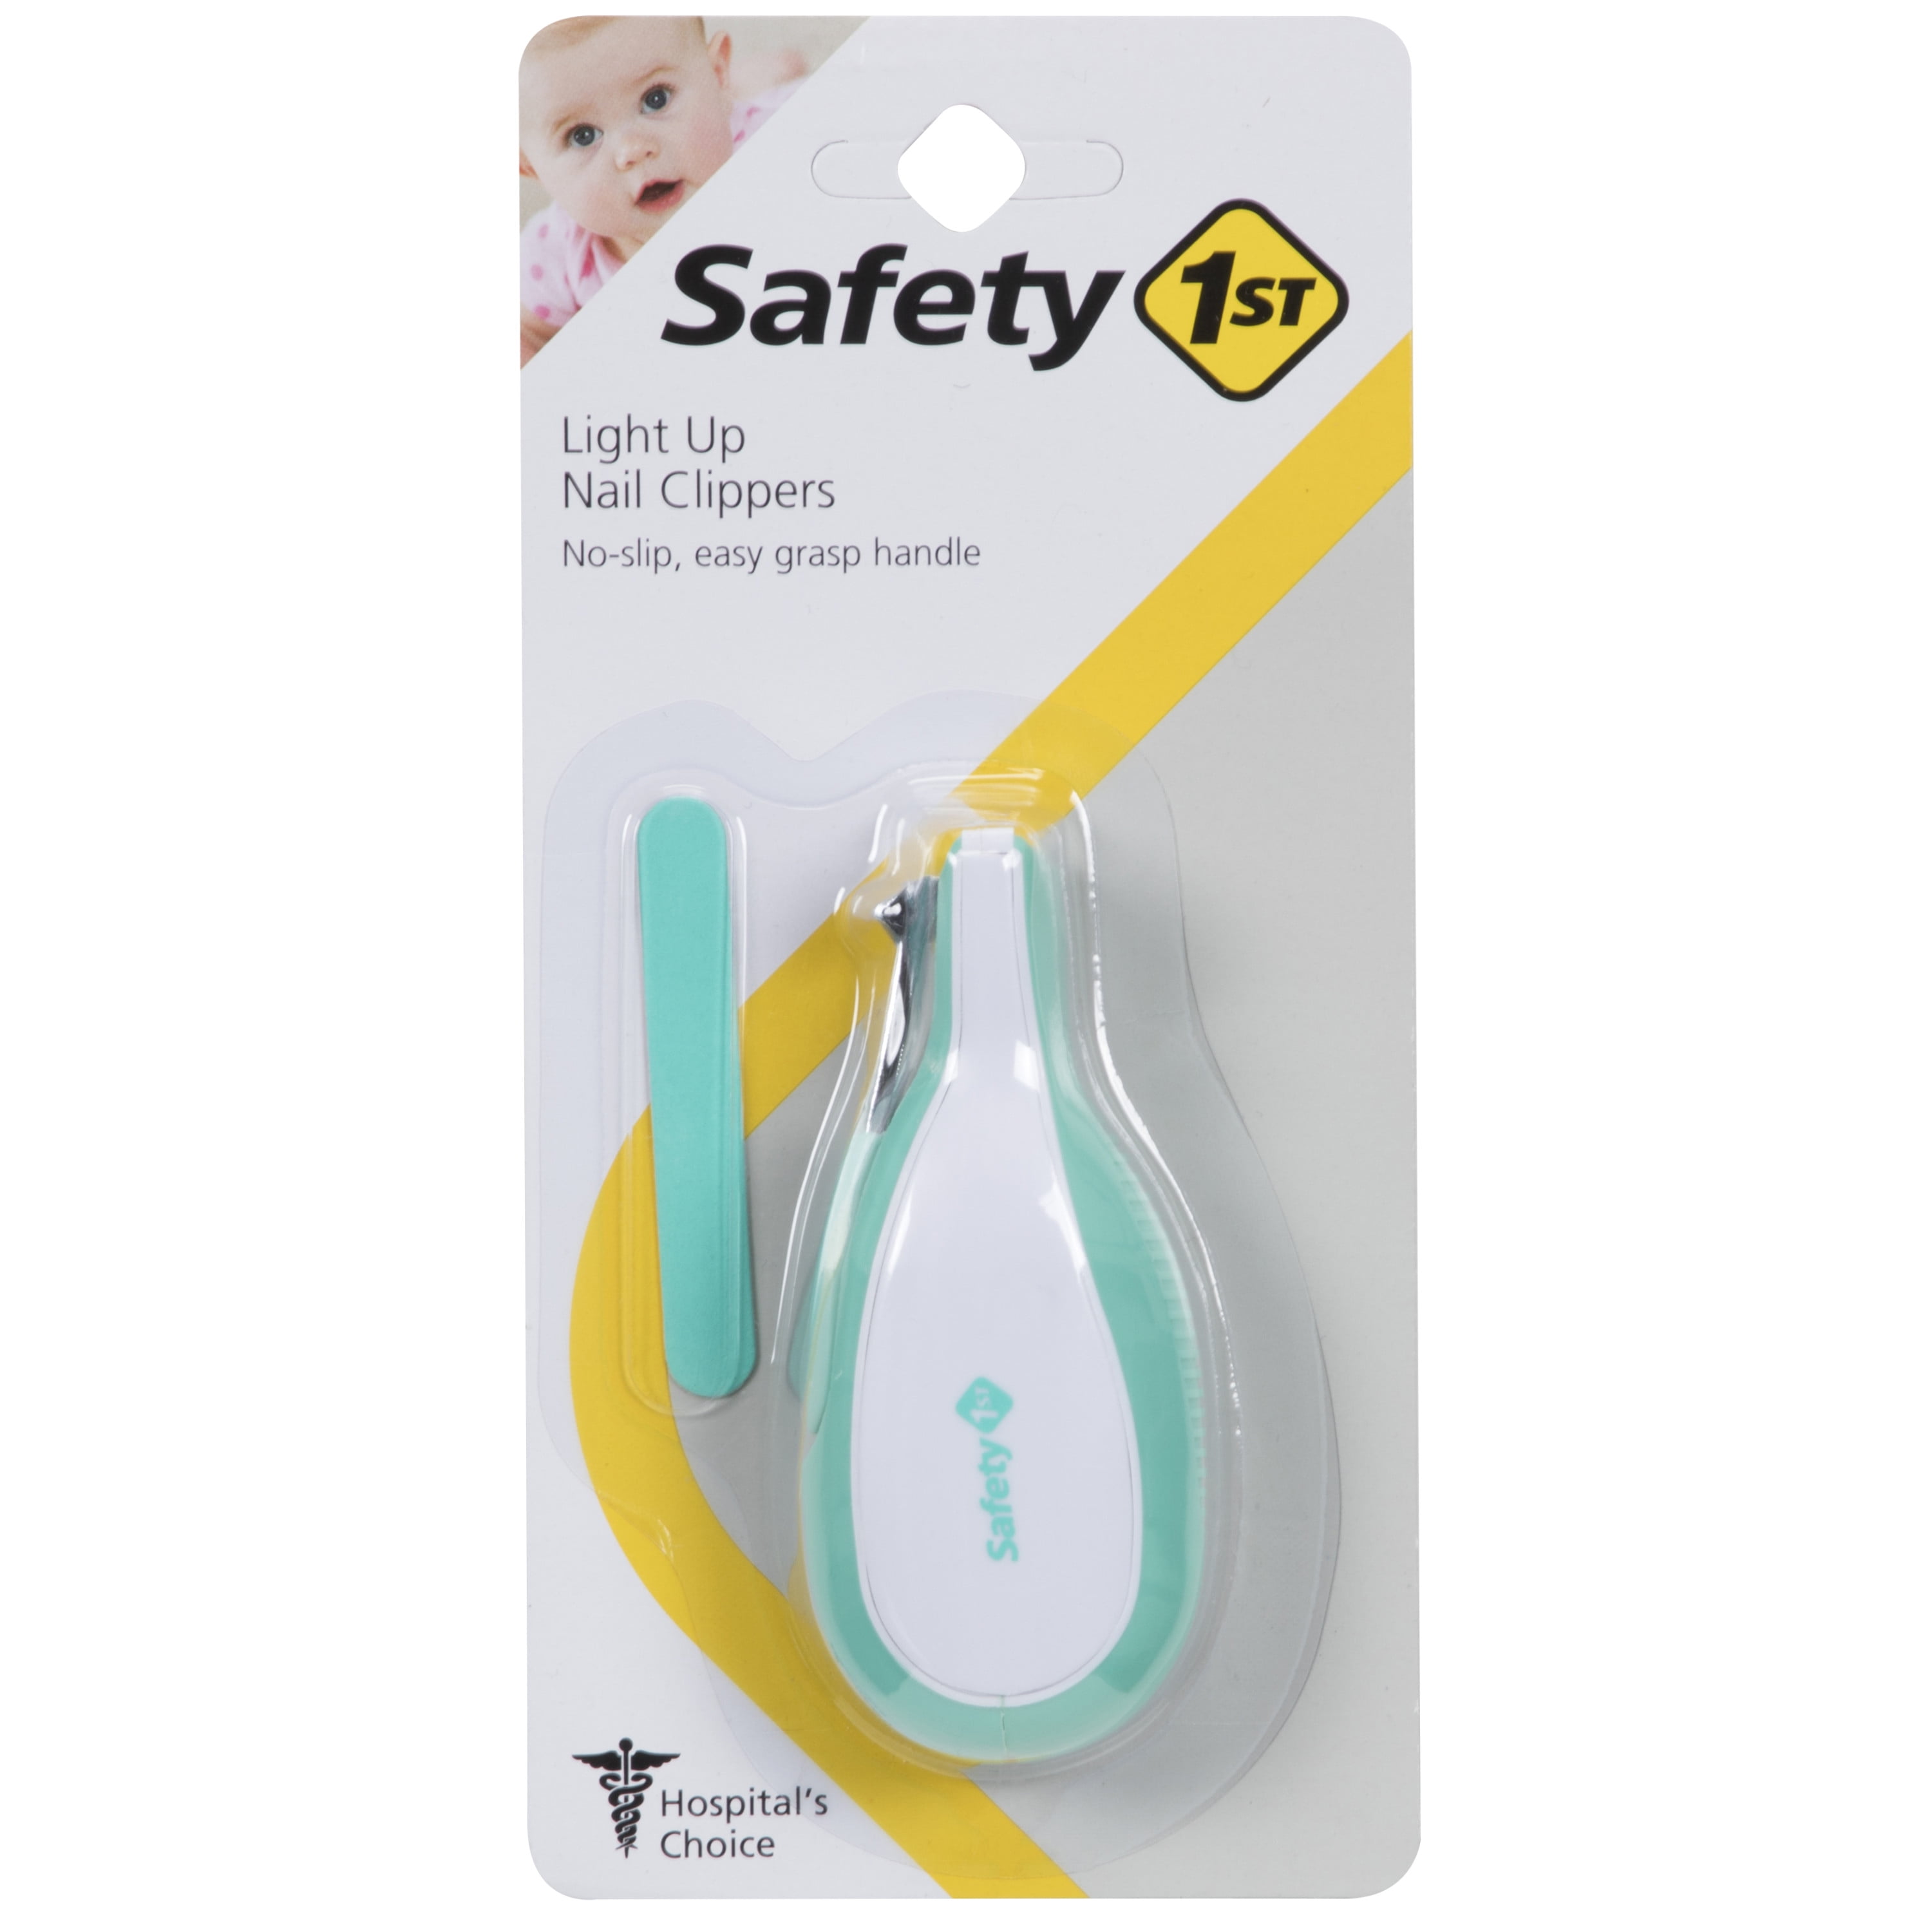 Safety 1 Light Up Nail Clippers, Seafoam